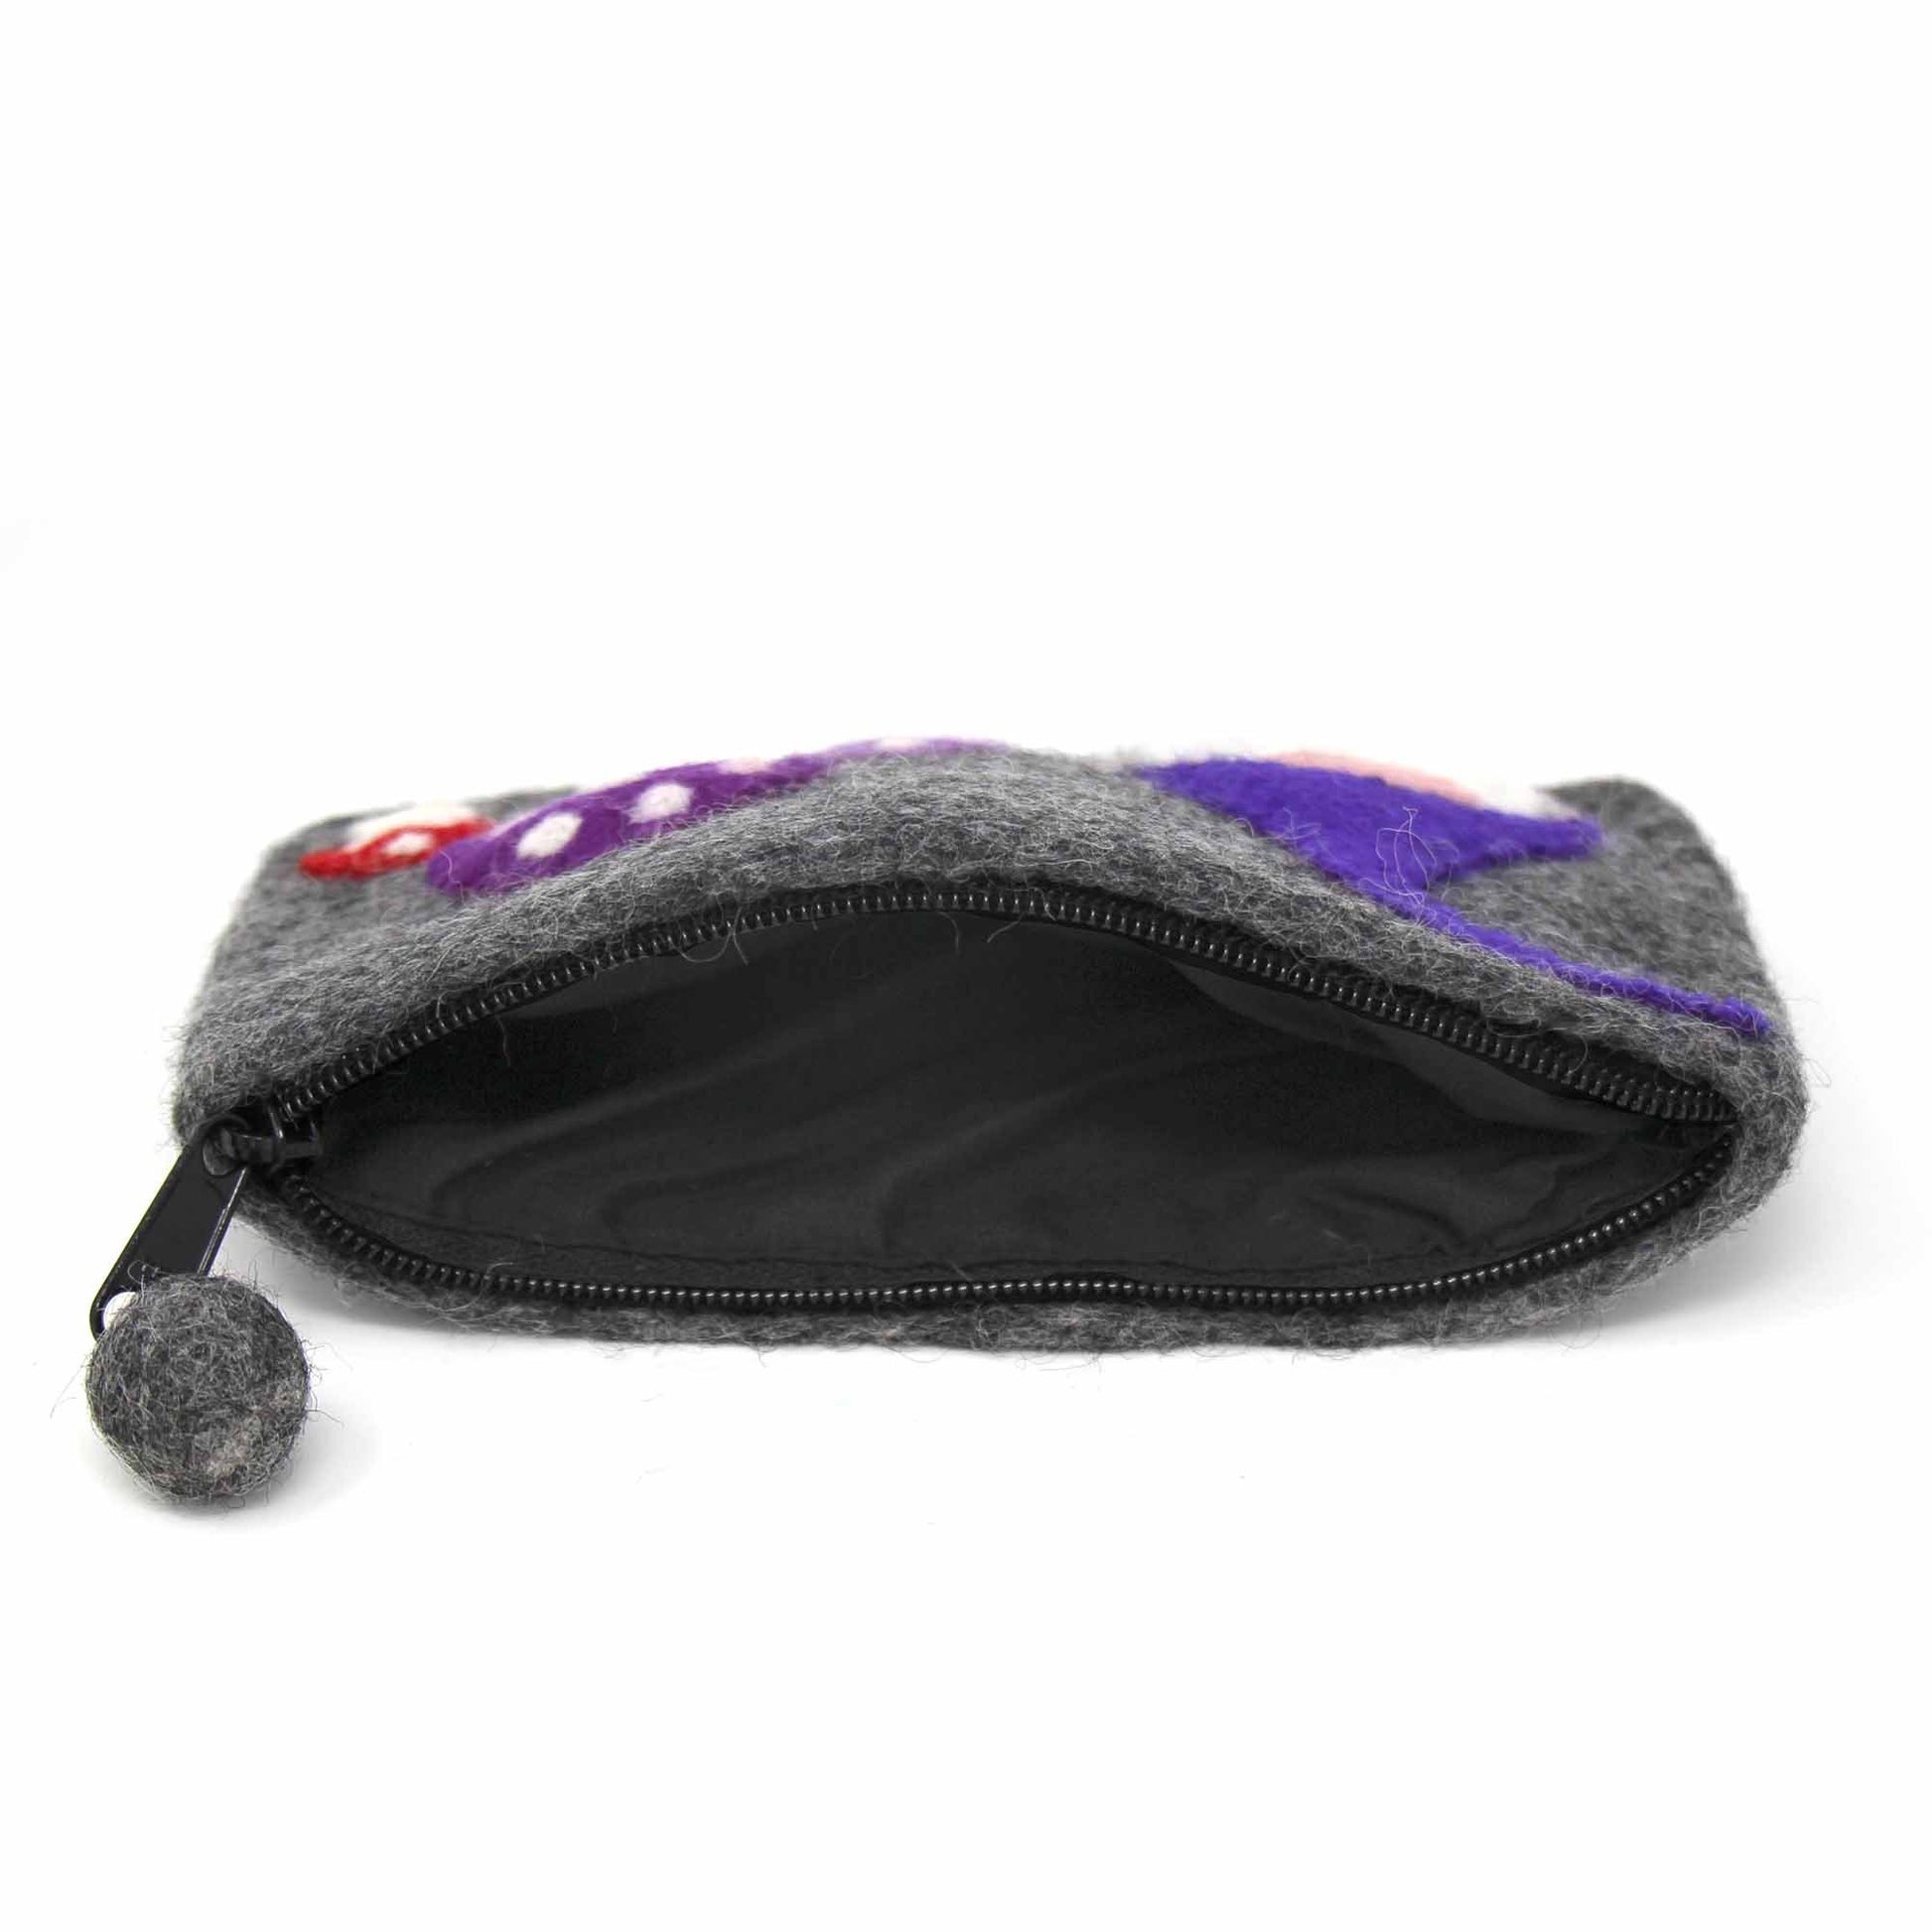 Hand Crafted Felt: Gnome and Mushroom Pouch - Linda Kay Gifford’s - Those Nasty Women TALK! by SWEETSurvivor